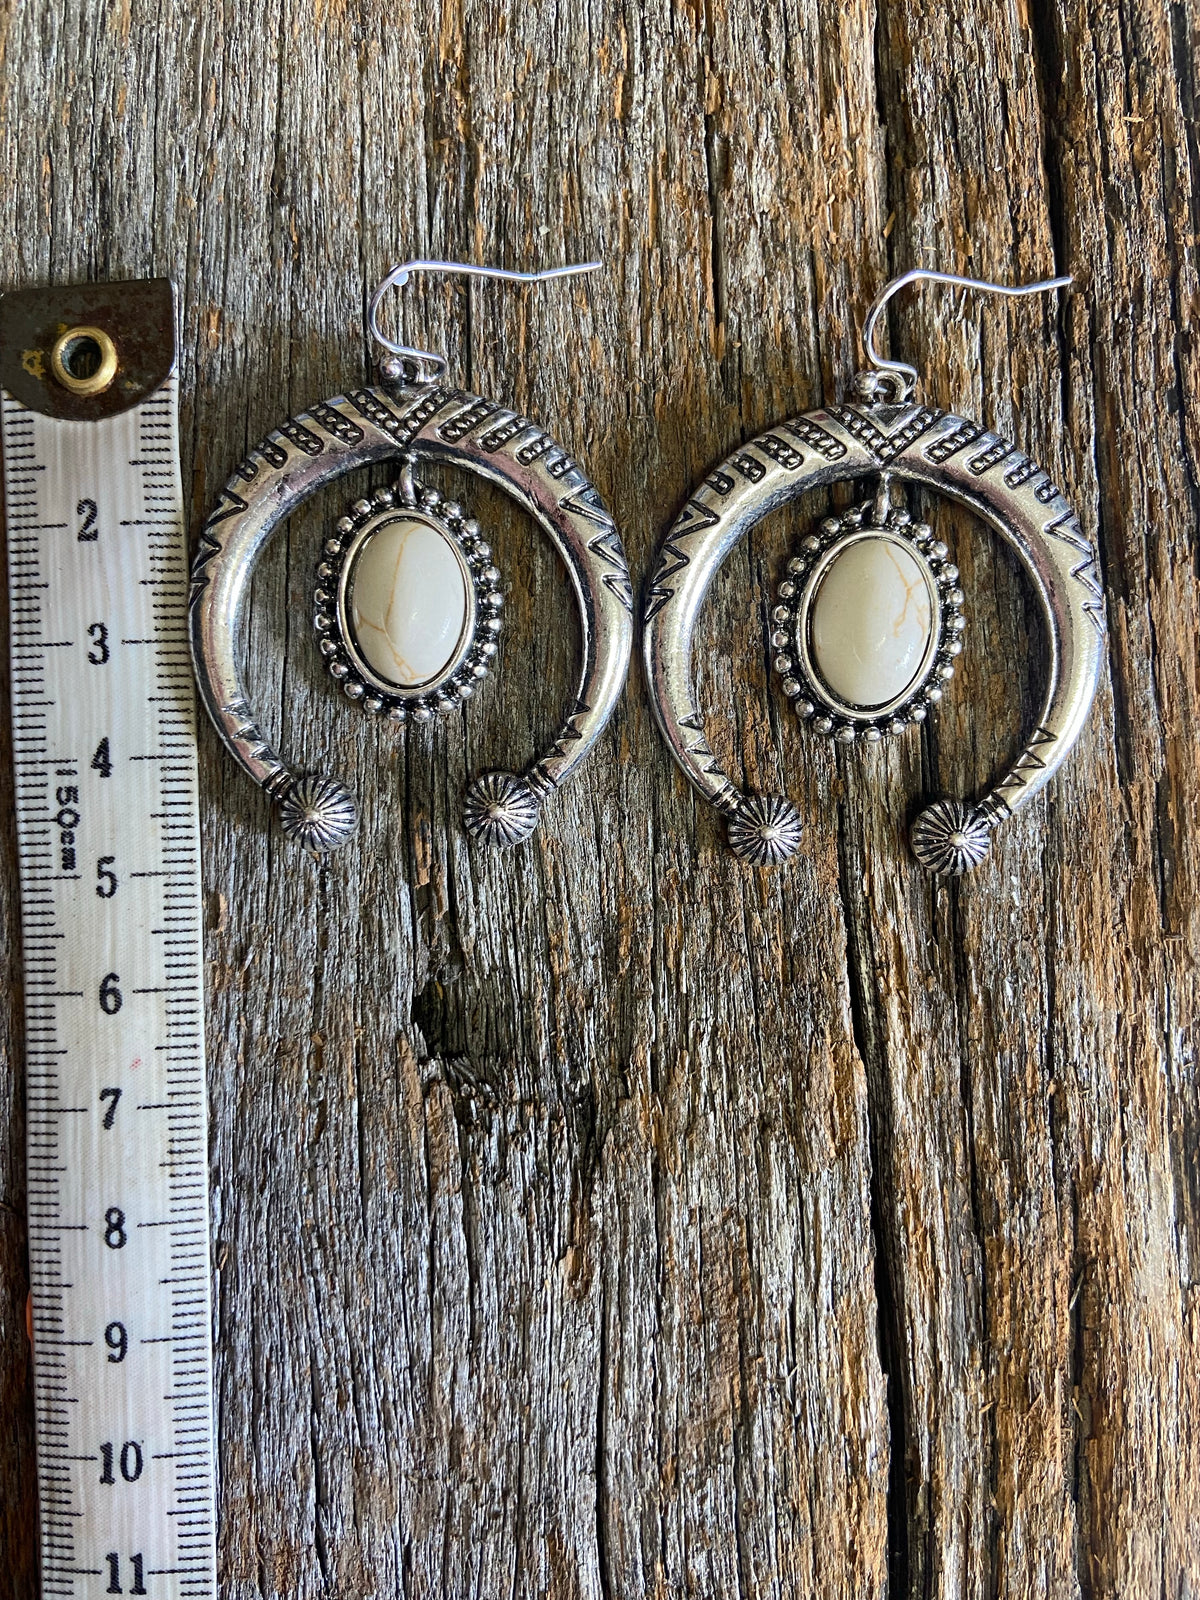 Western Earrings - Antique Silver and Natural Stone Half Hoop